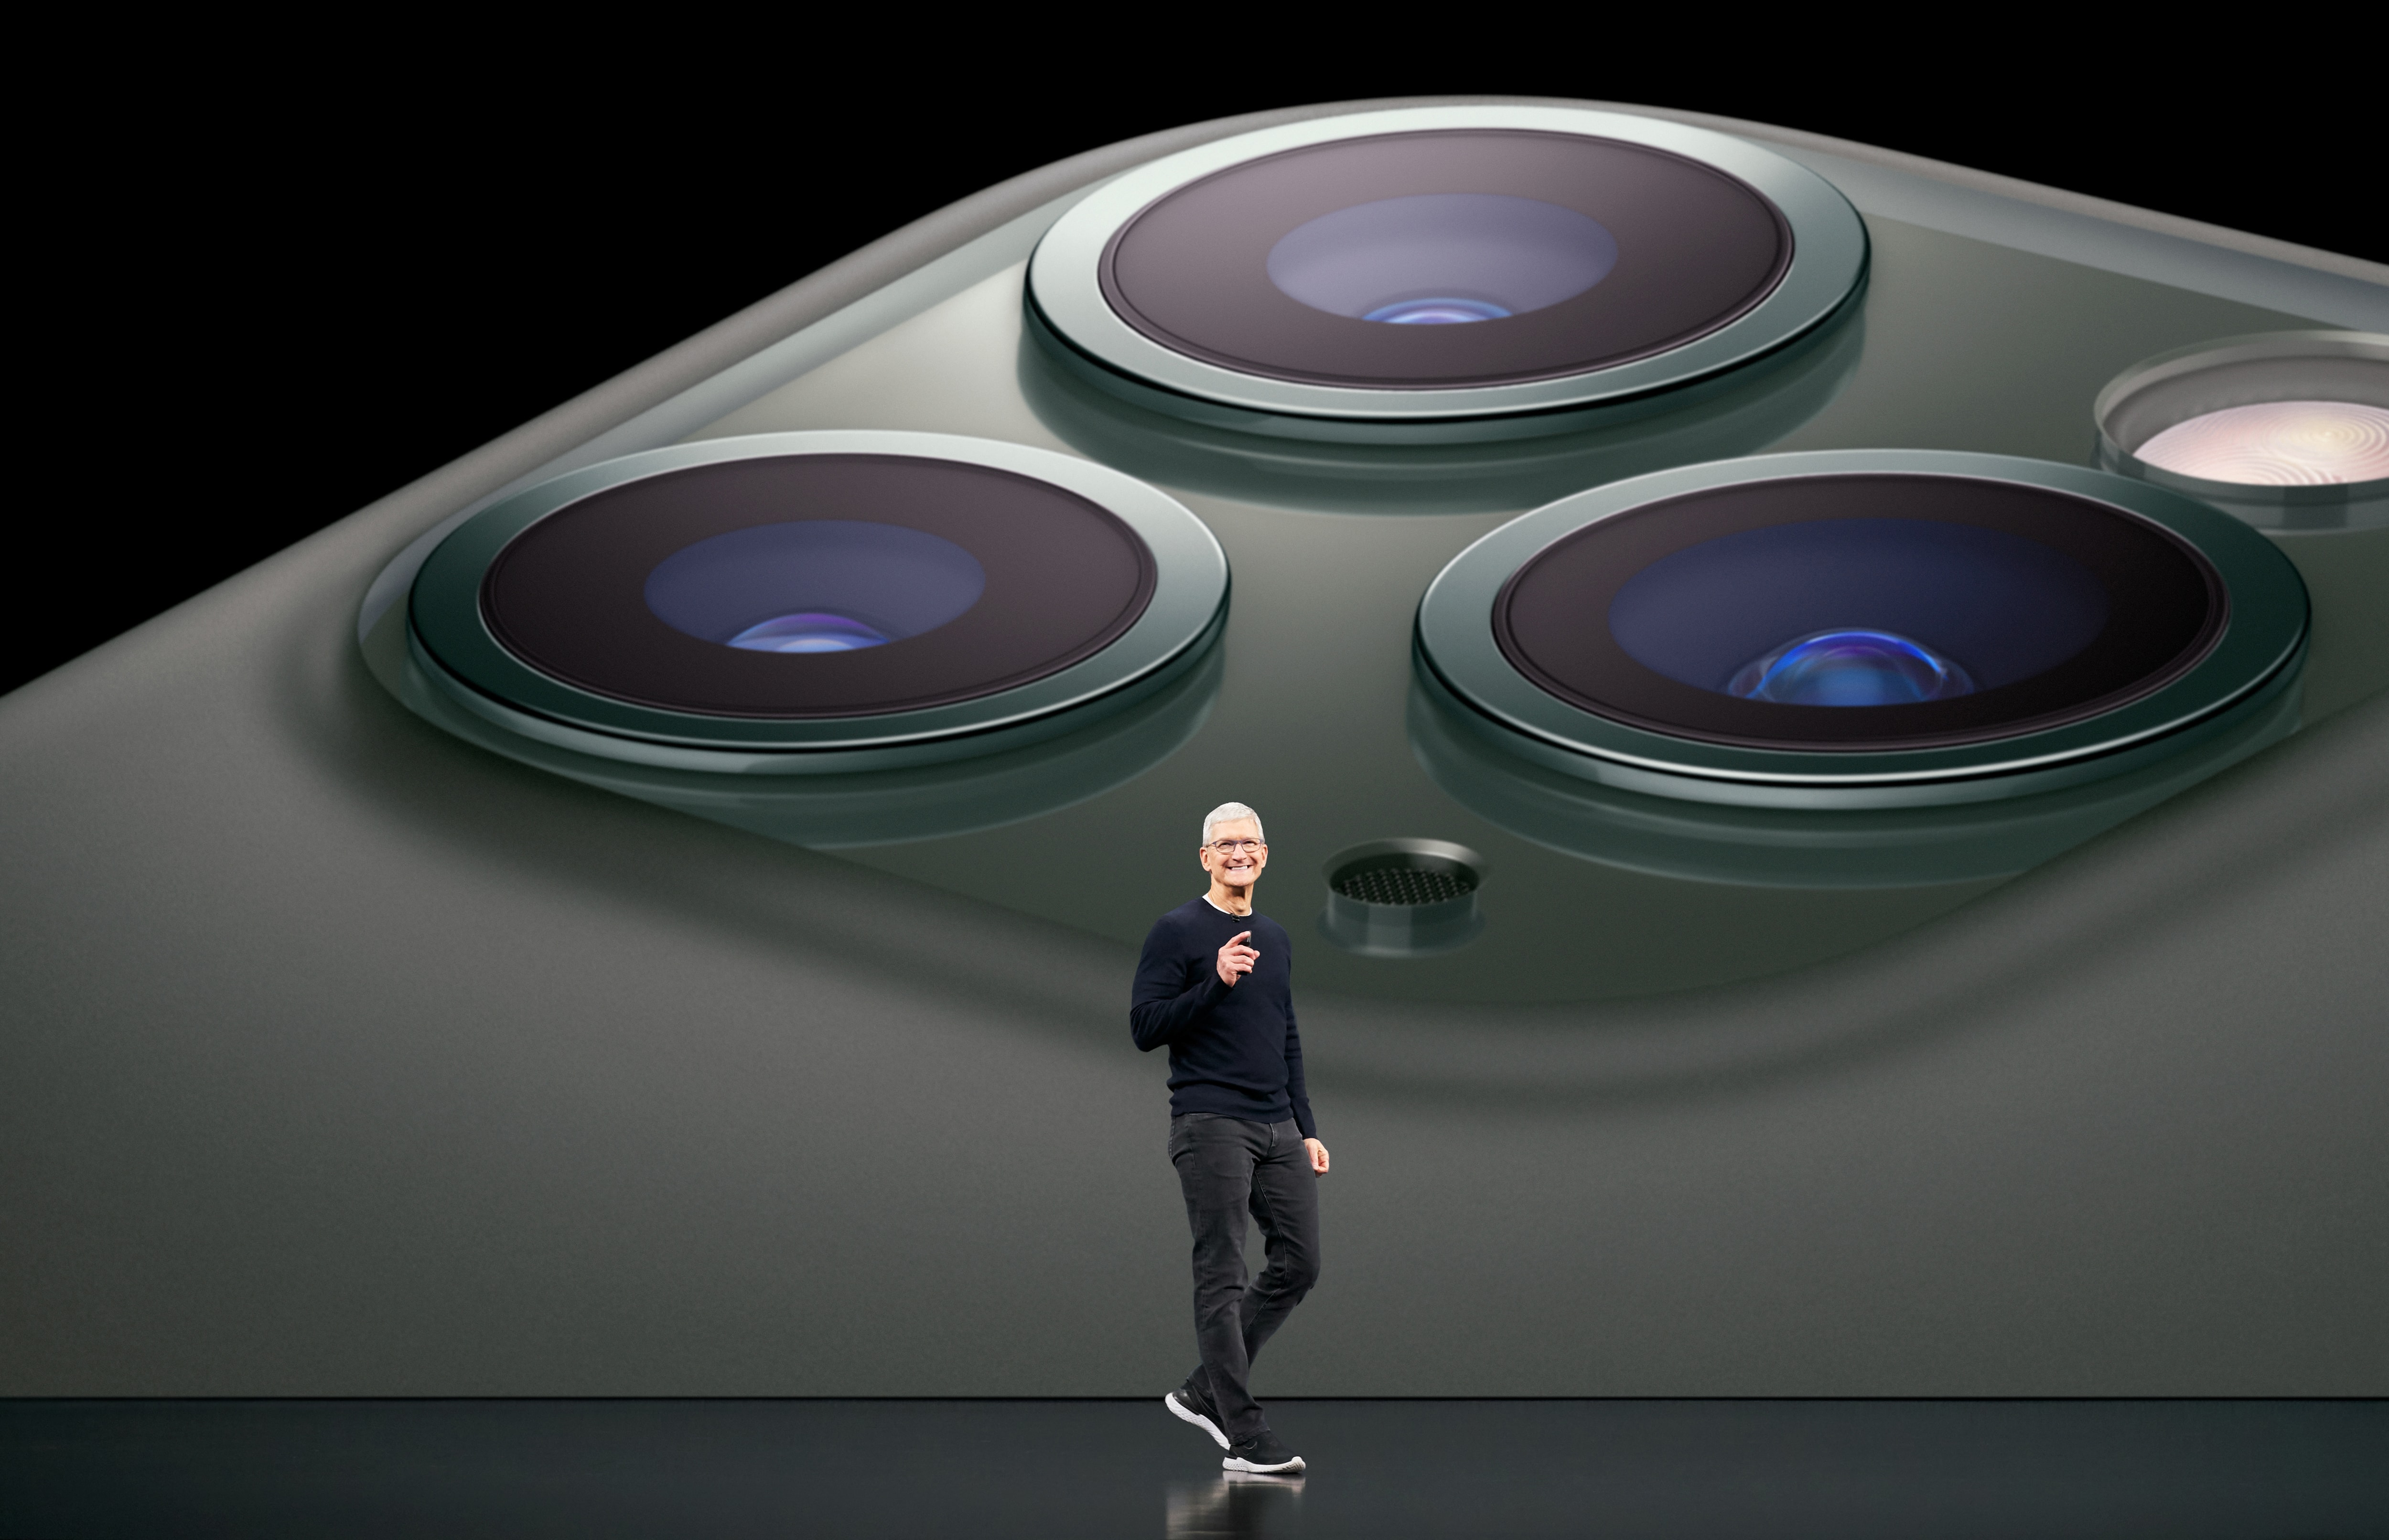 Good job, Tim! The iPhone 11 event got our heads spinning.